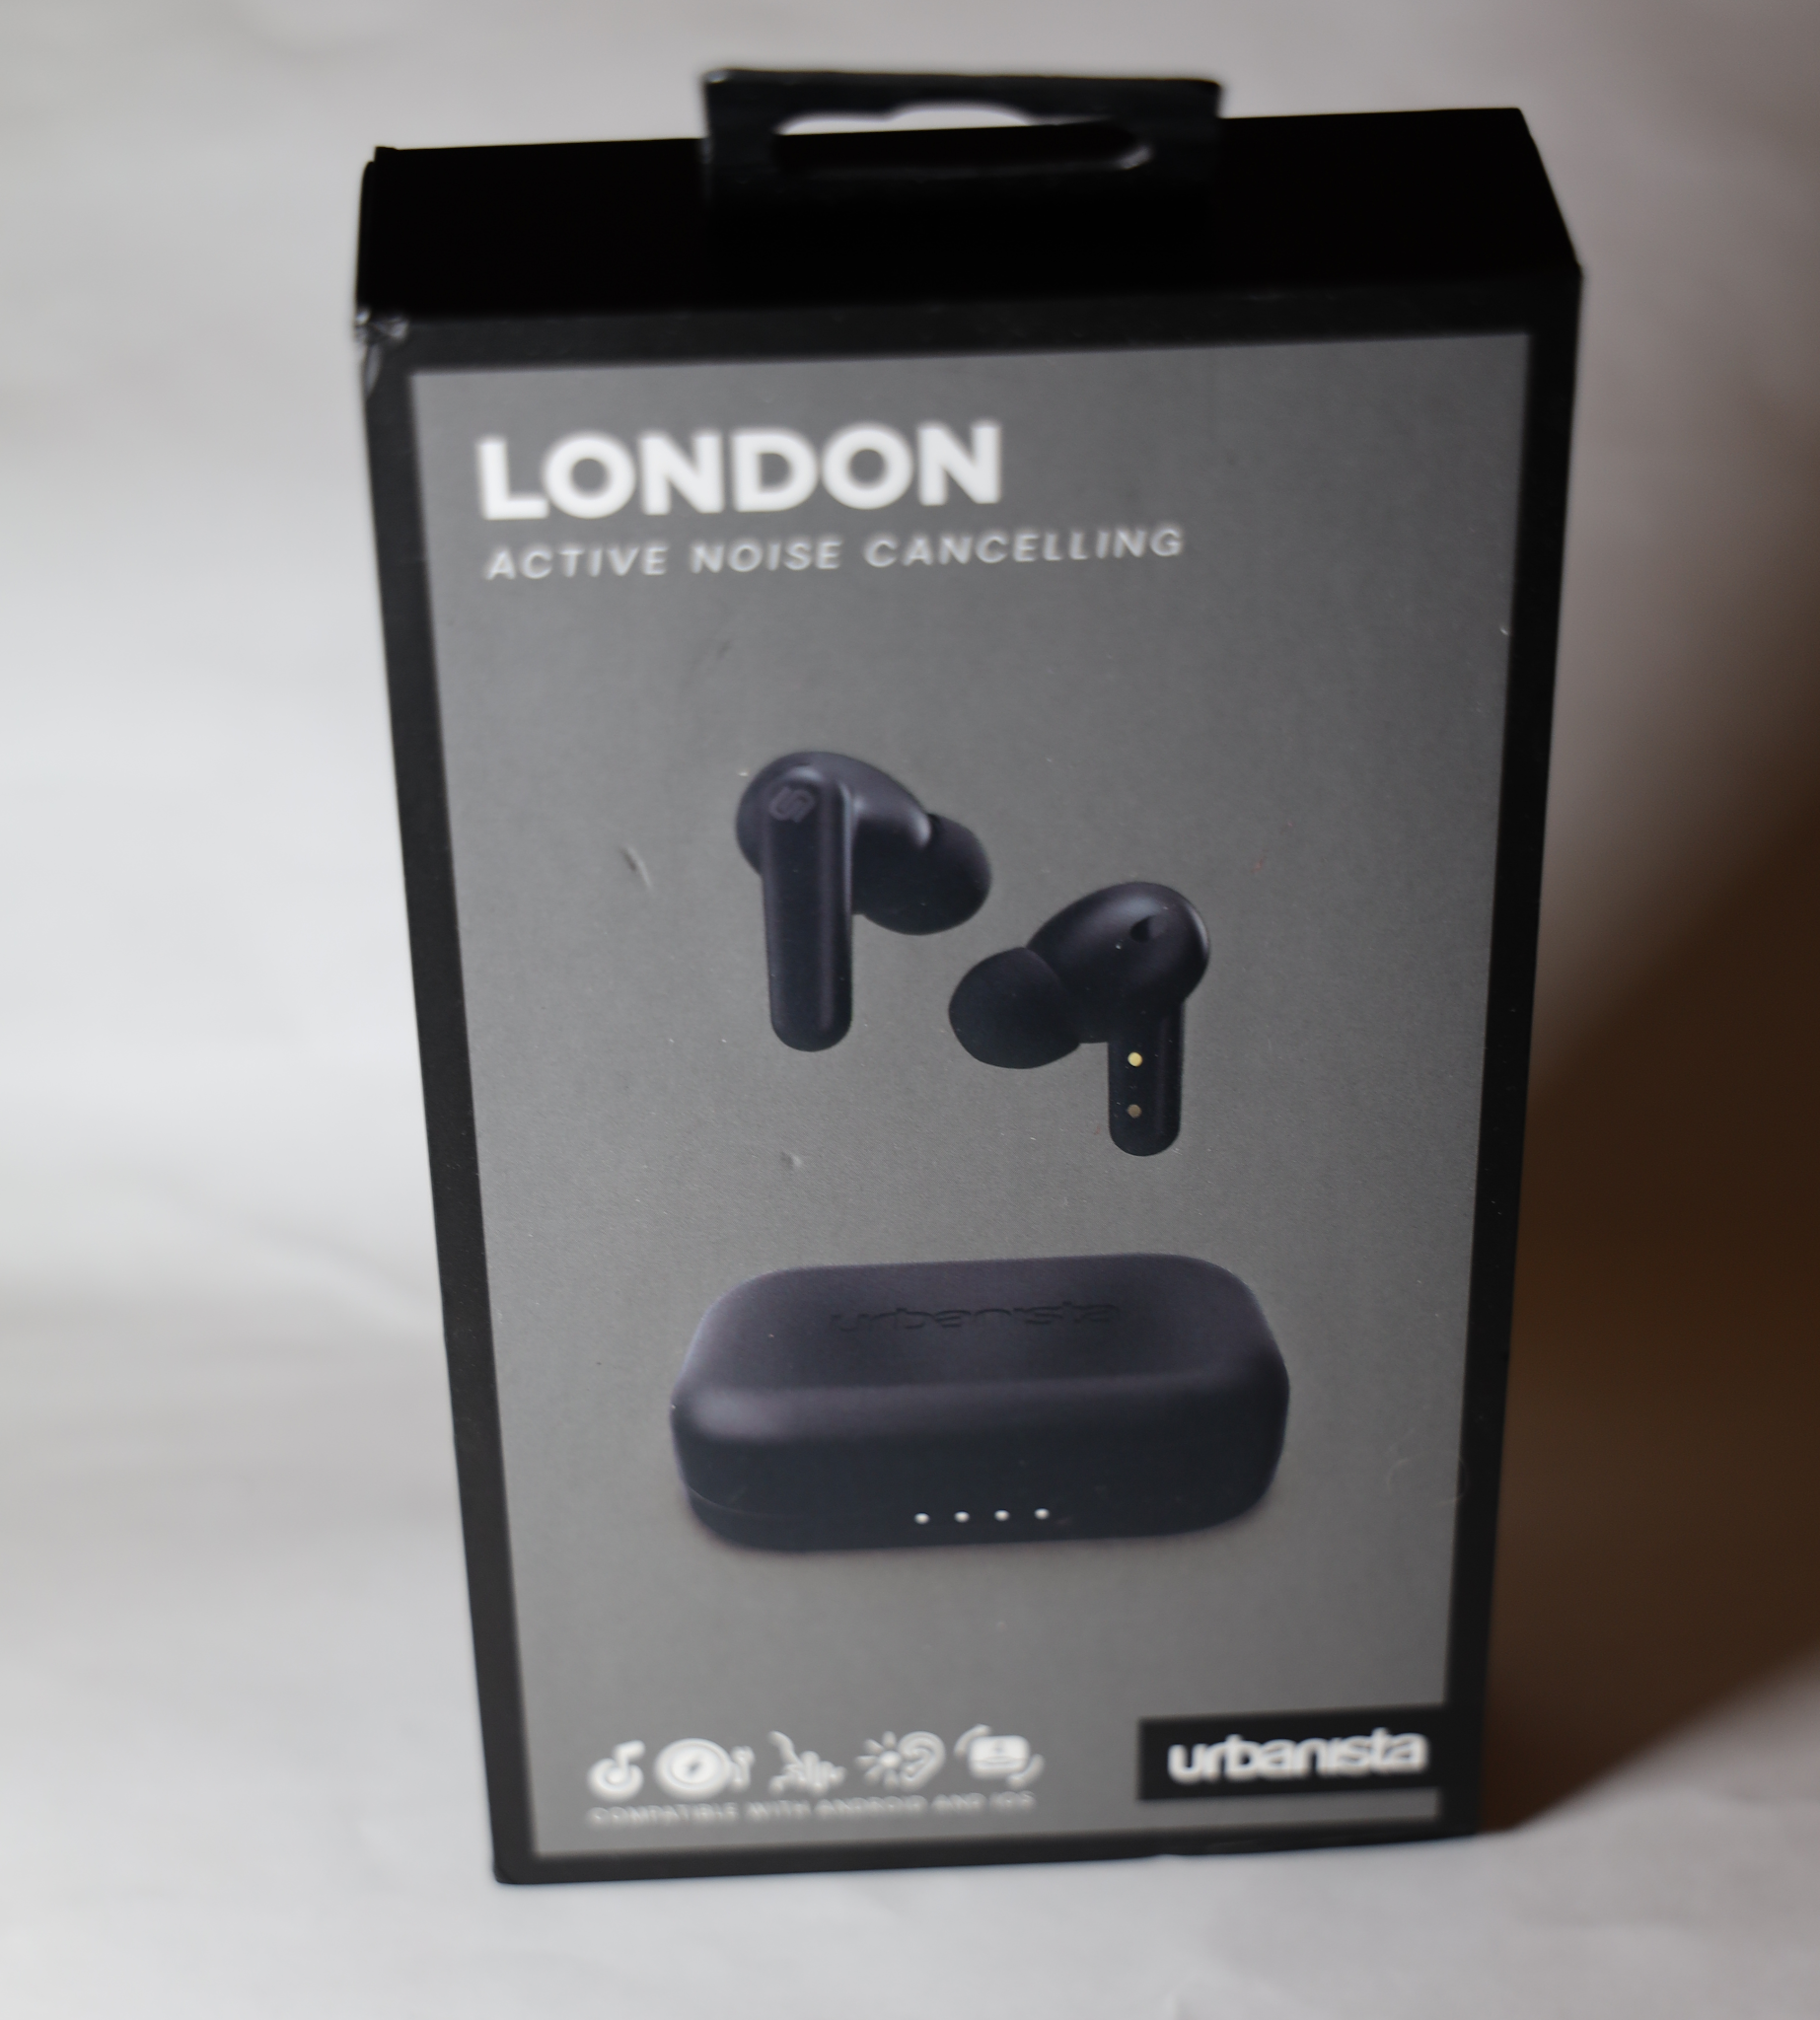 Euro Tech News: Sweden does the London sound